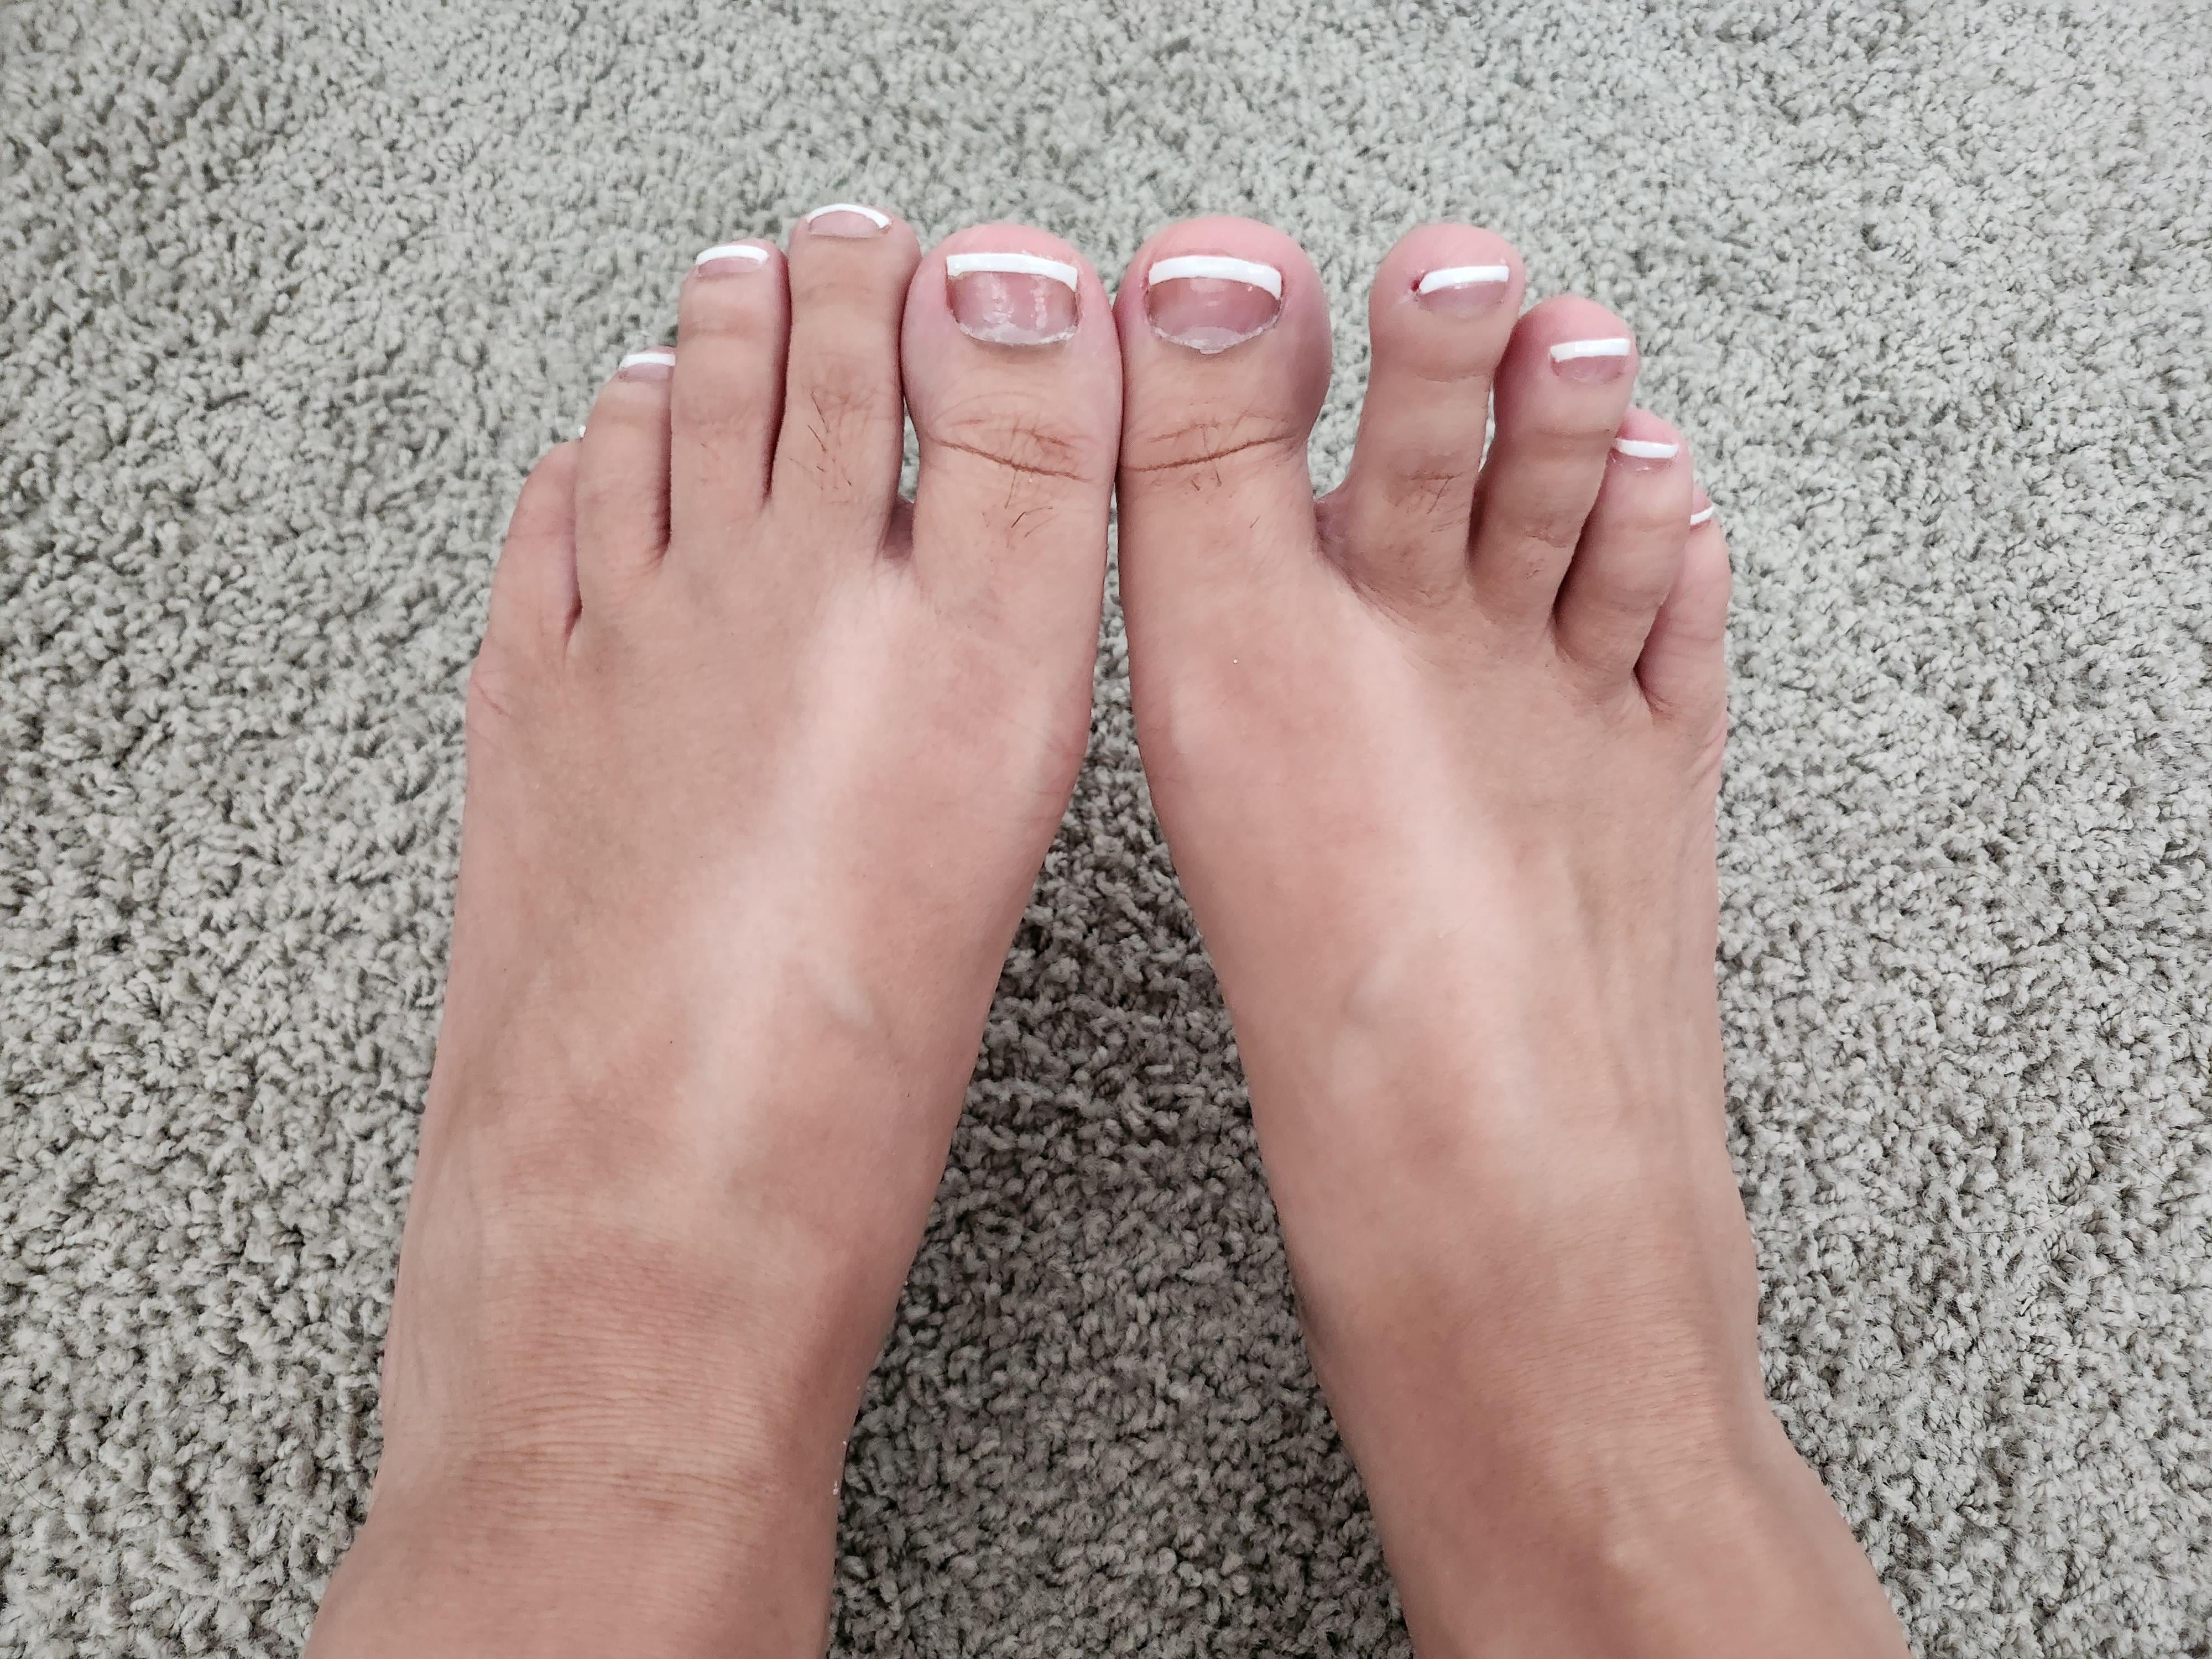 French pedicure with sandal tanlines